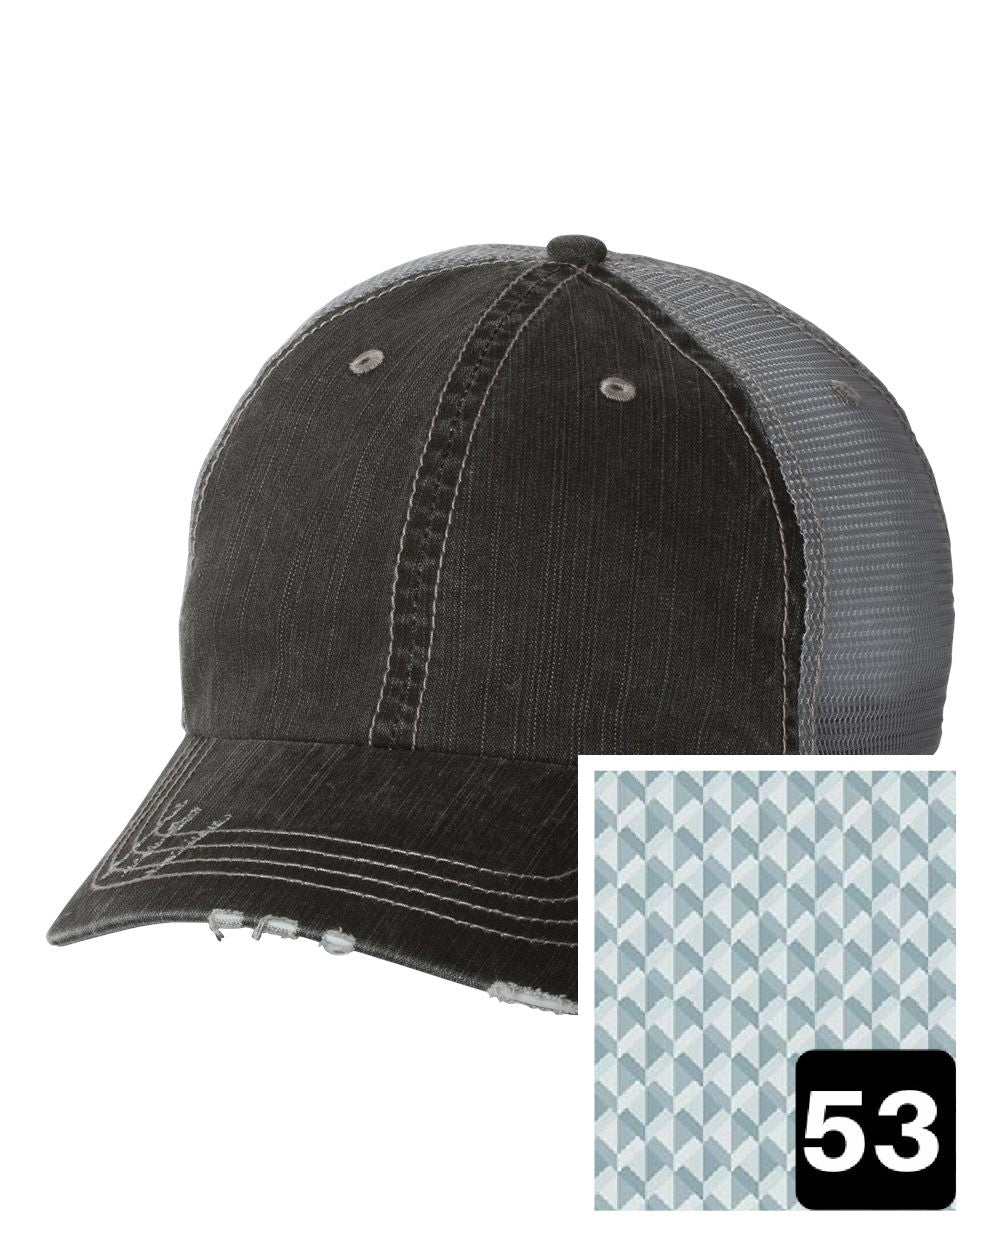 gray distressed trucker hat with multi-color stripe fabric state of North Carolina